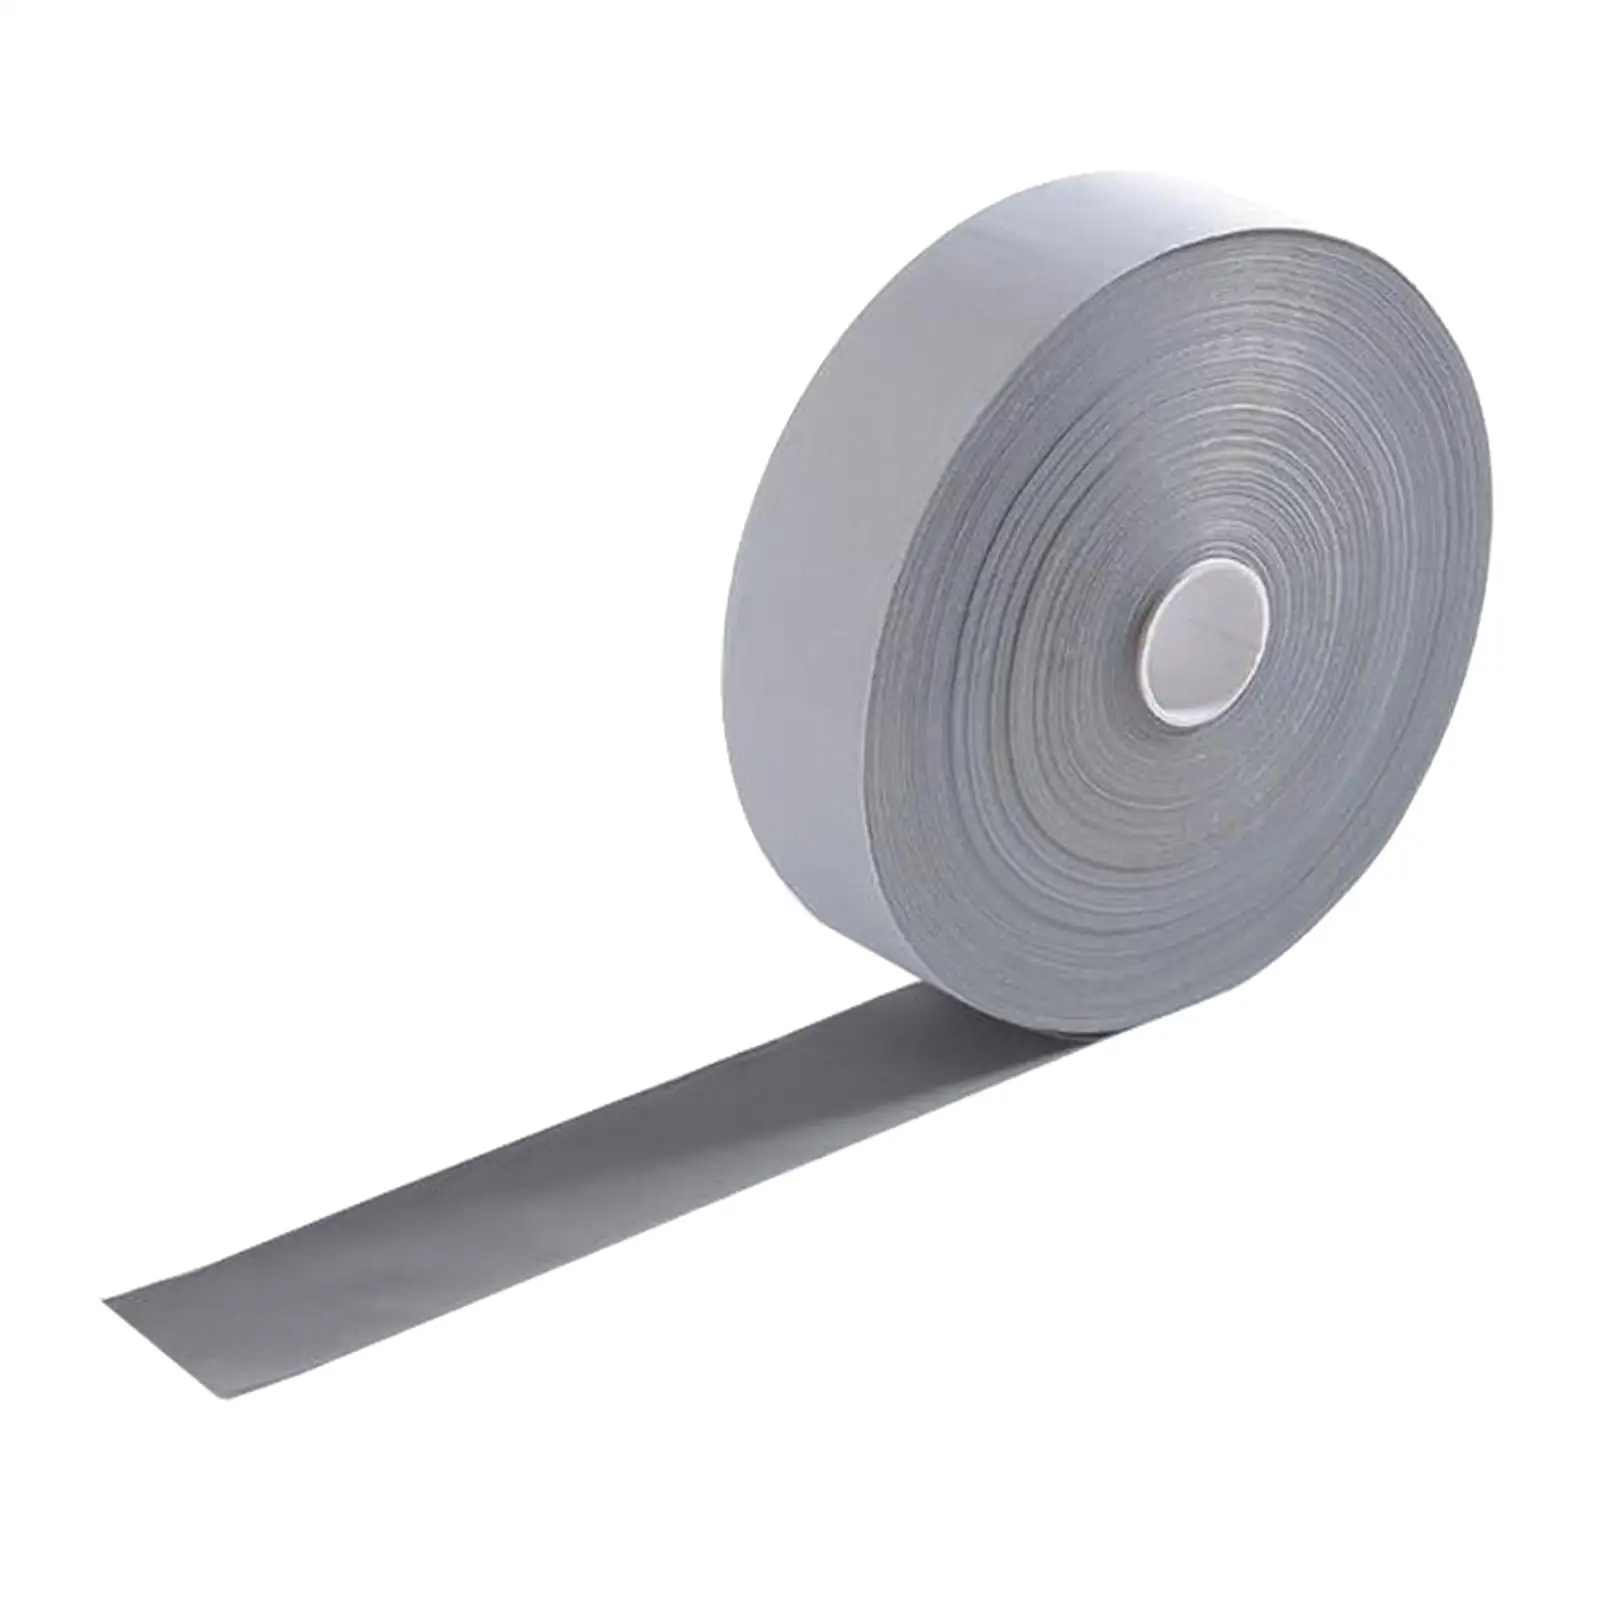 Reflective Tape Adhesive Conspicuity Tape for Handmade Crafts